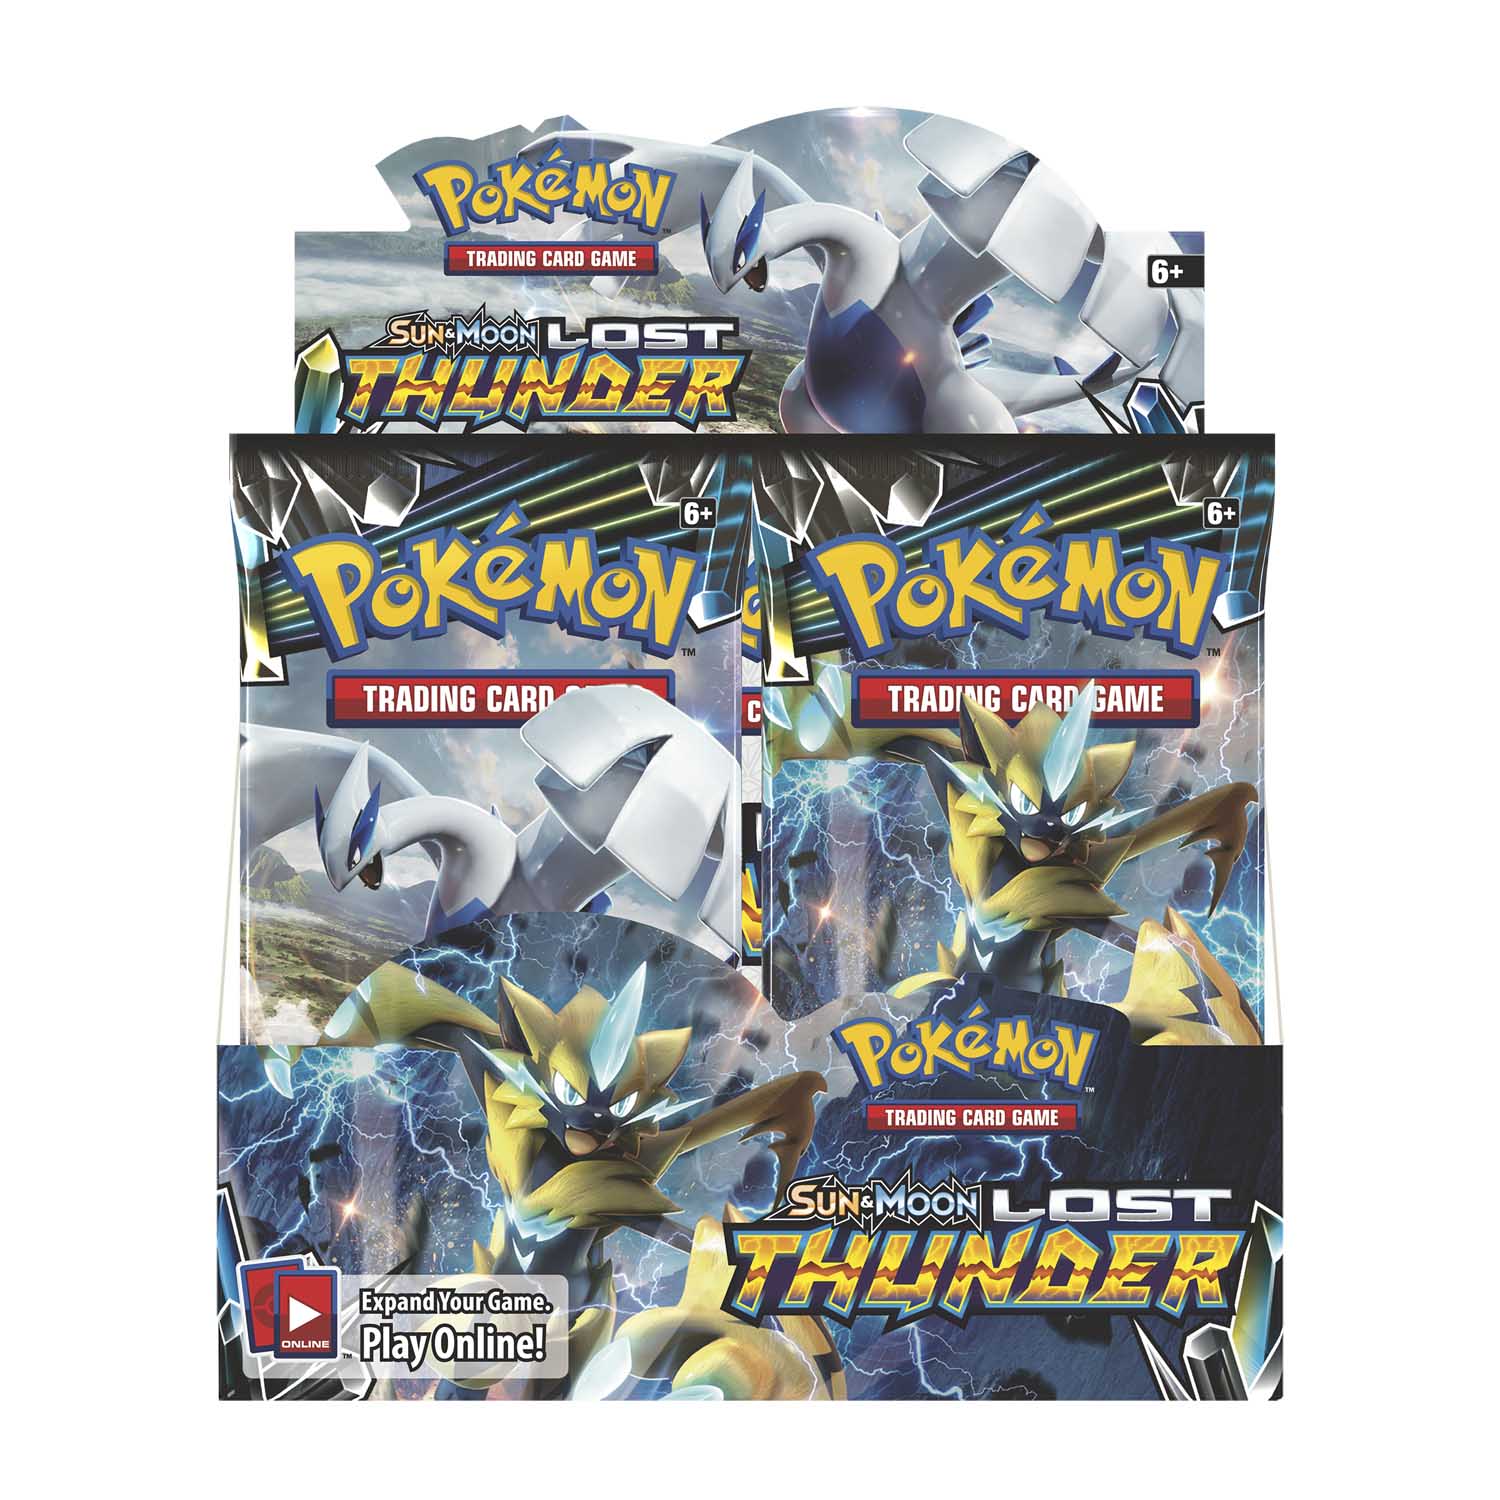 Inklusive toy 36 Booster-Packs Pokemon TCG Sun & Moon Lost Thunder Booster-Box 